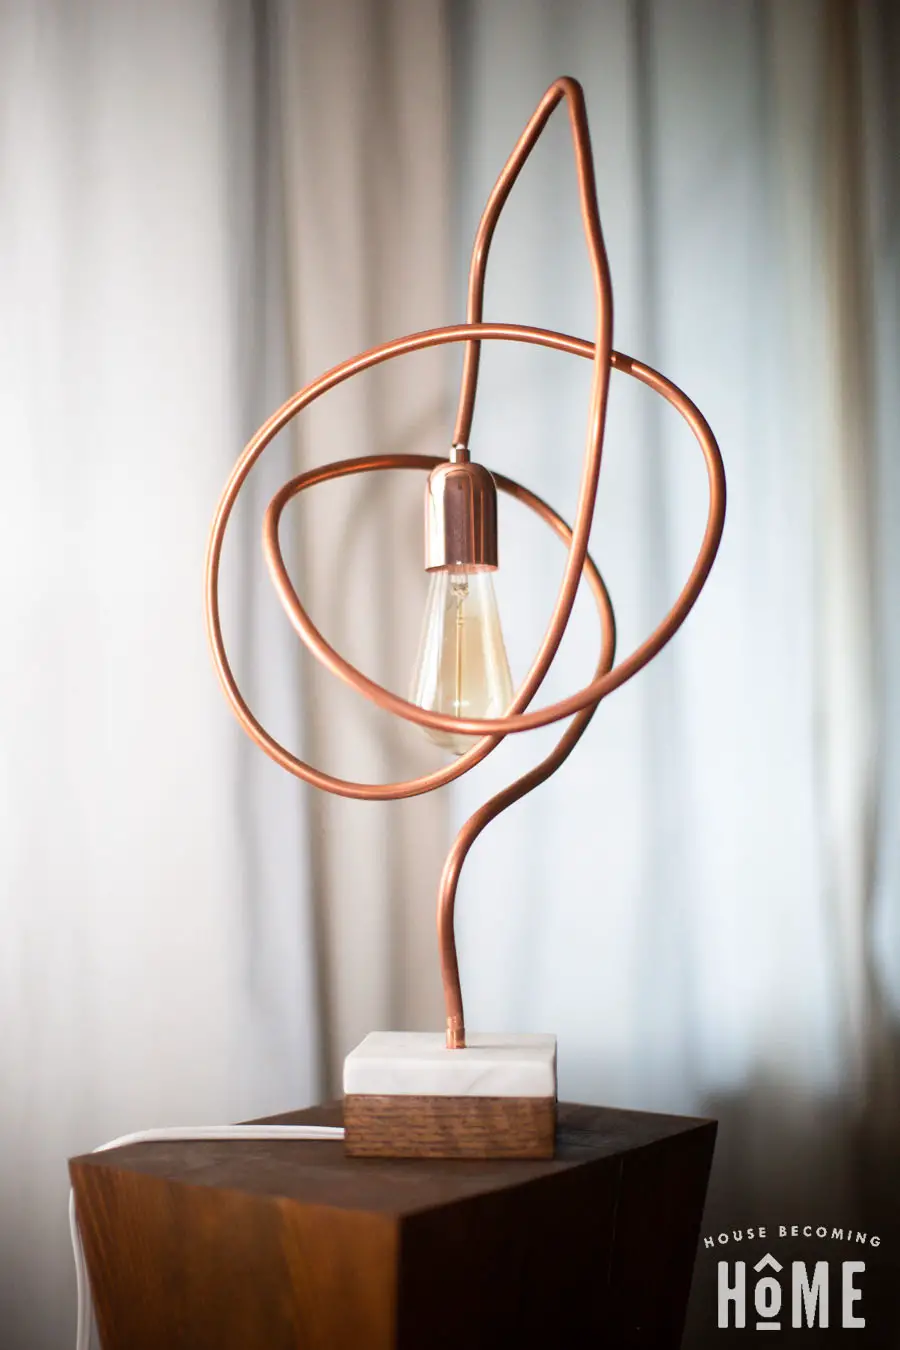 Twisted Copper Pipe DIY modern light